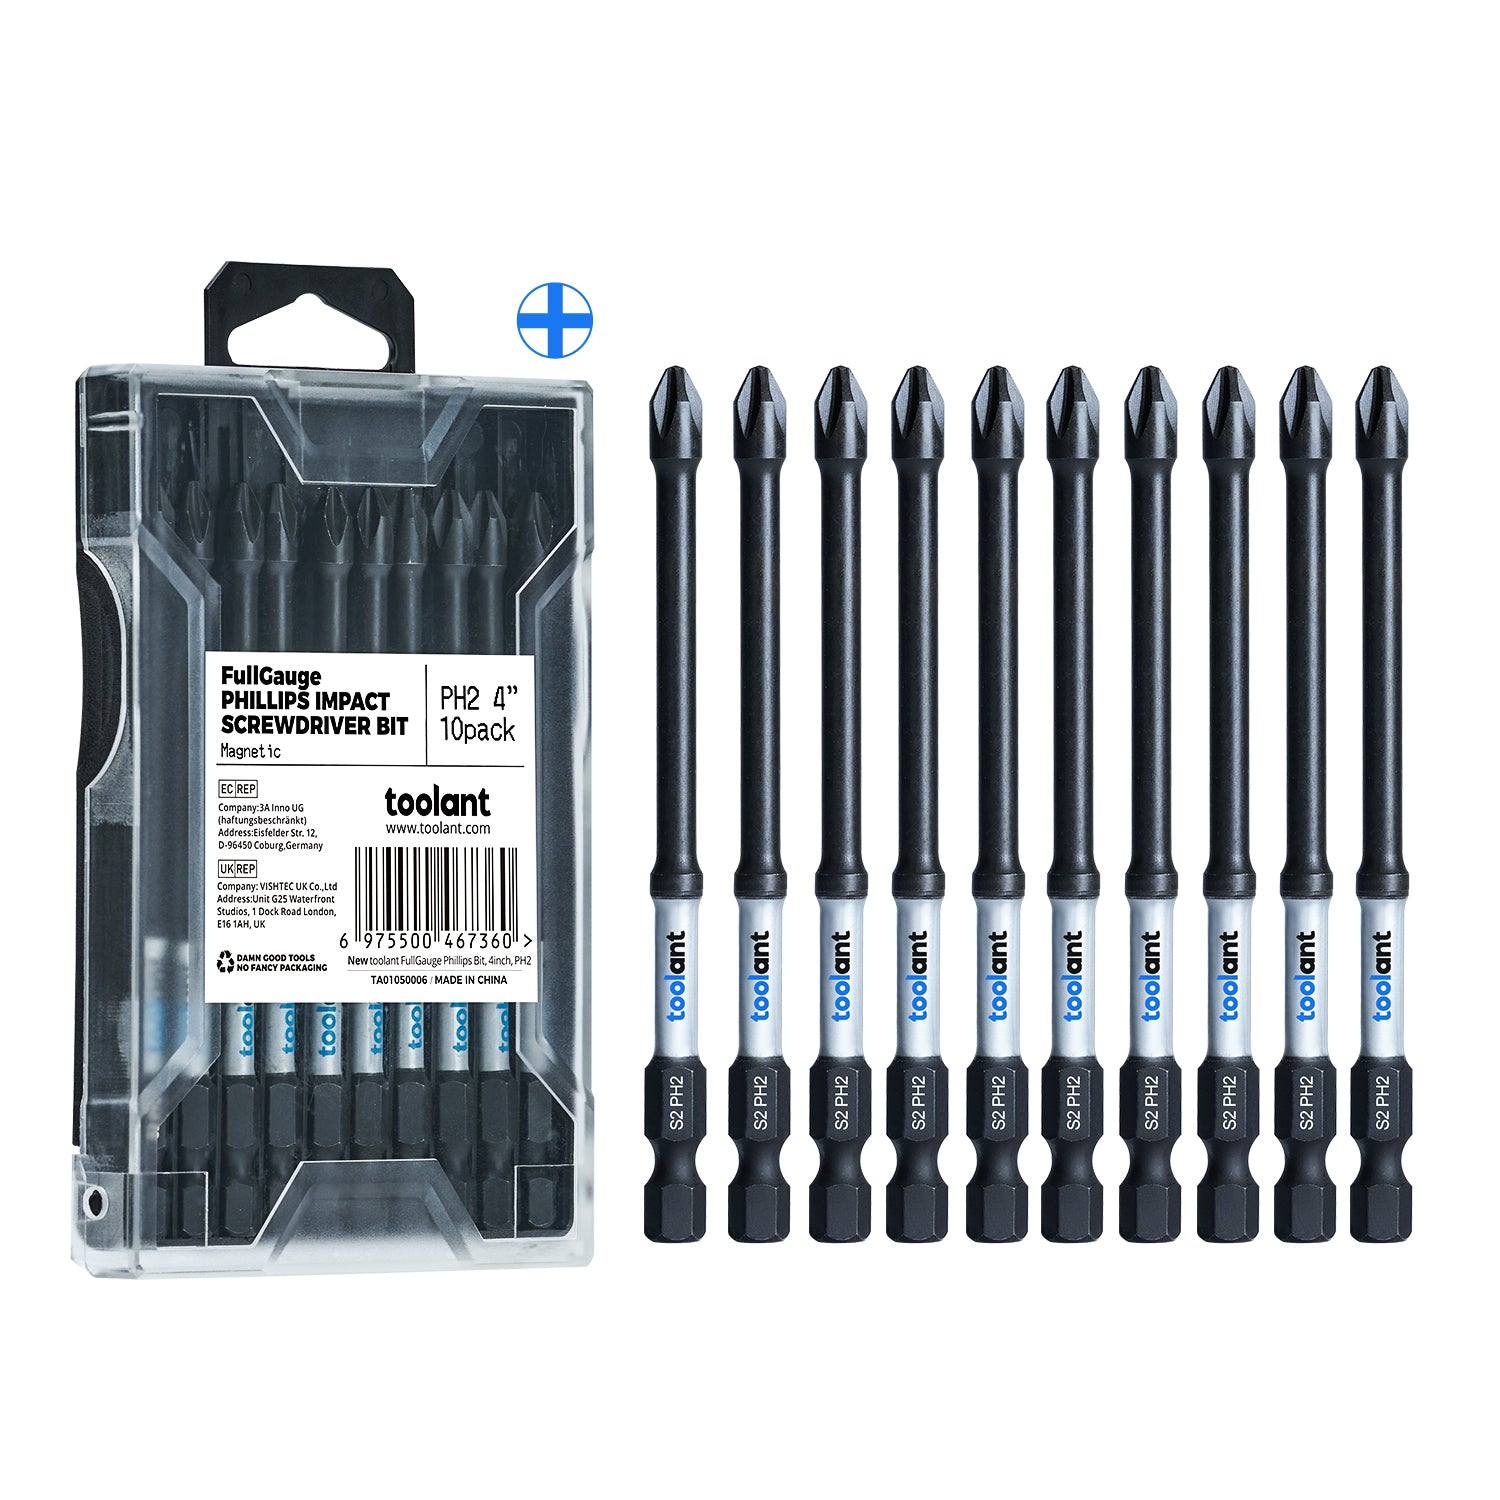 toolant 4 inch Phillips Bit#2 Magnetic Anti Slip Impact Screwdriver Bits Set,10pcs Insert S2 Steel PH2 Driver dit Set with CNC Machined Tips for